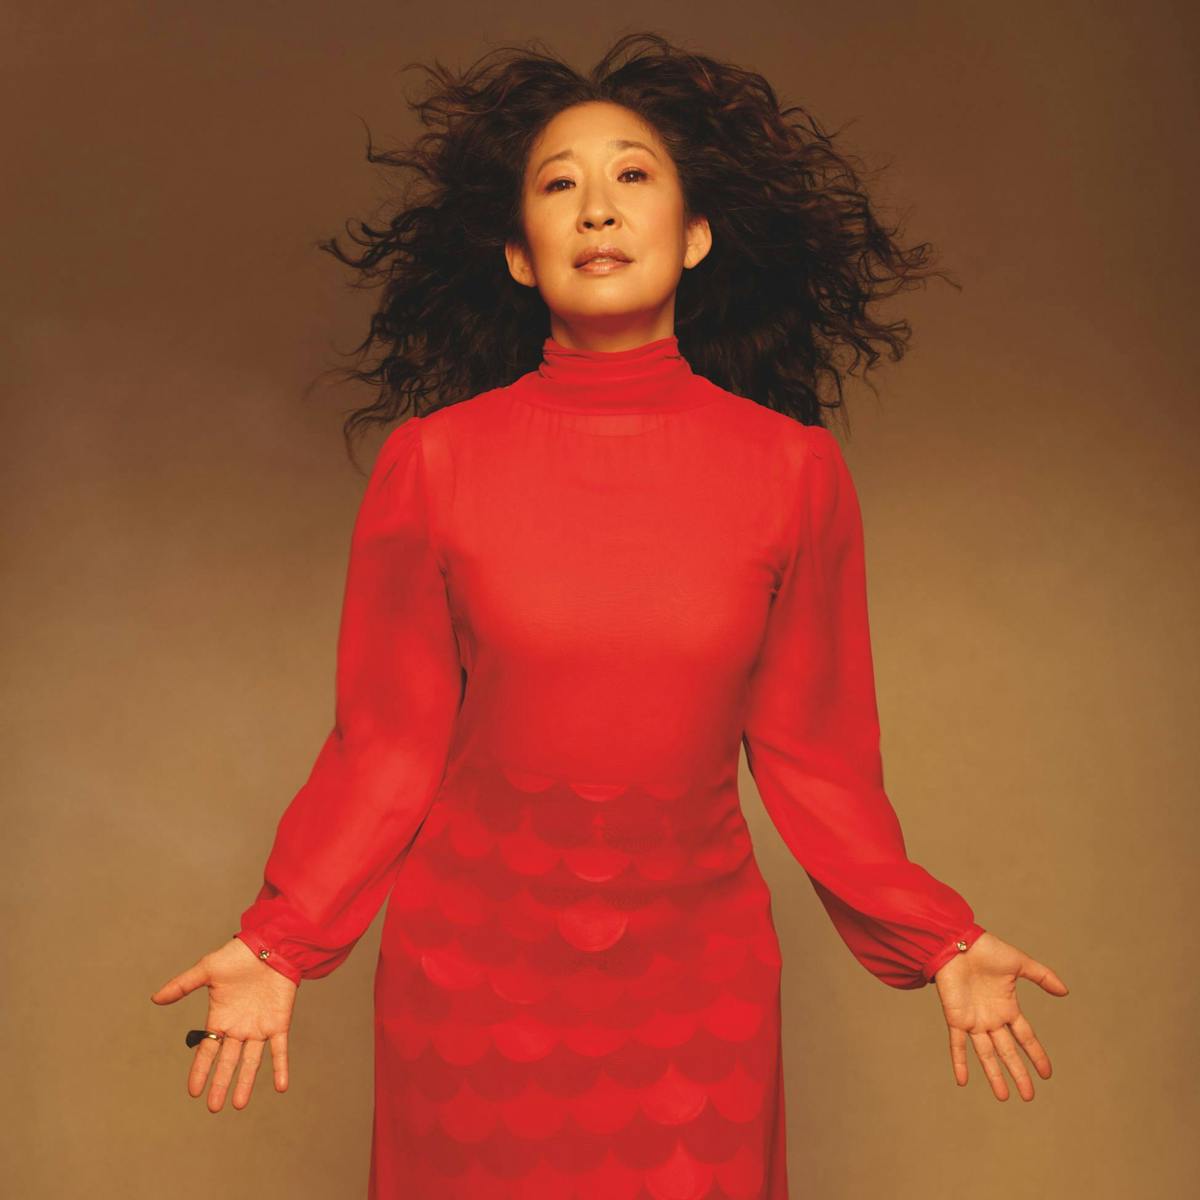 Wearing a stunning long-sleeved red chiffon dress Sandra Oh moves confident & playfully in front of the camera. Her long curly hair billowing around her.